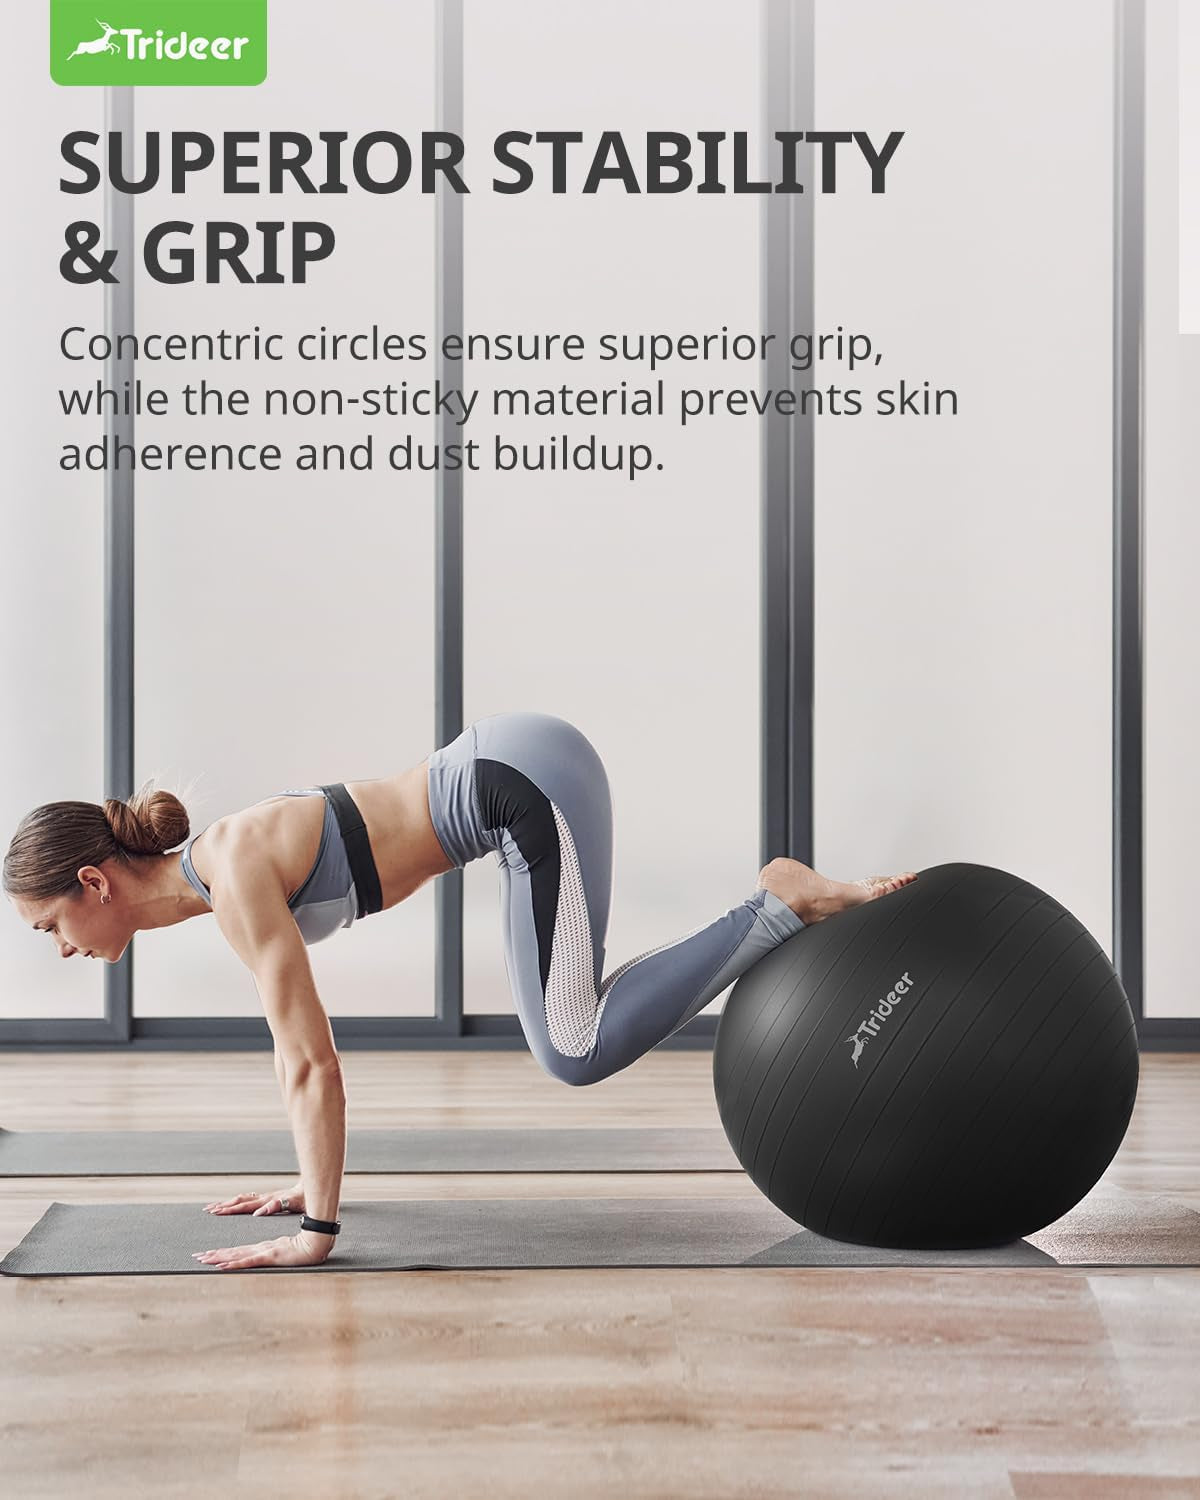 Yoga Ball Exercise Ball for Working Out, 5 Sizes Gym Ball, Birthing Ball for Pregnancy, Swiss Ball for Physical Therapy, Balance, Stability, Fitness, Office Ball Chair, Quick Pump Included